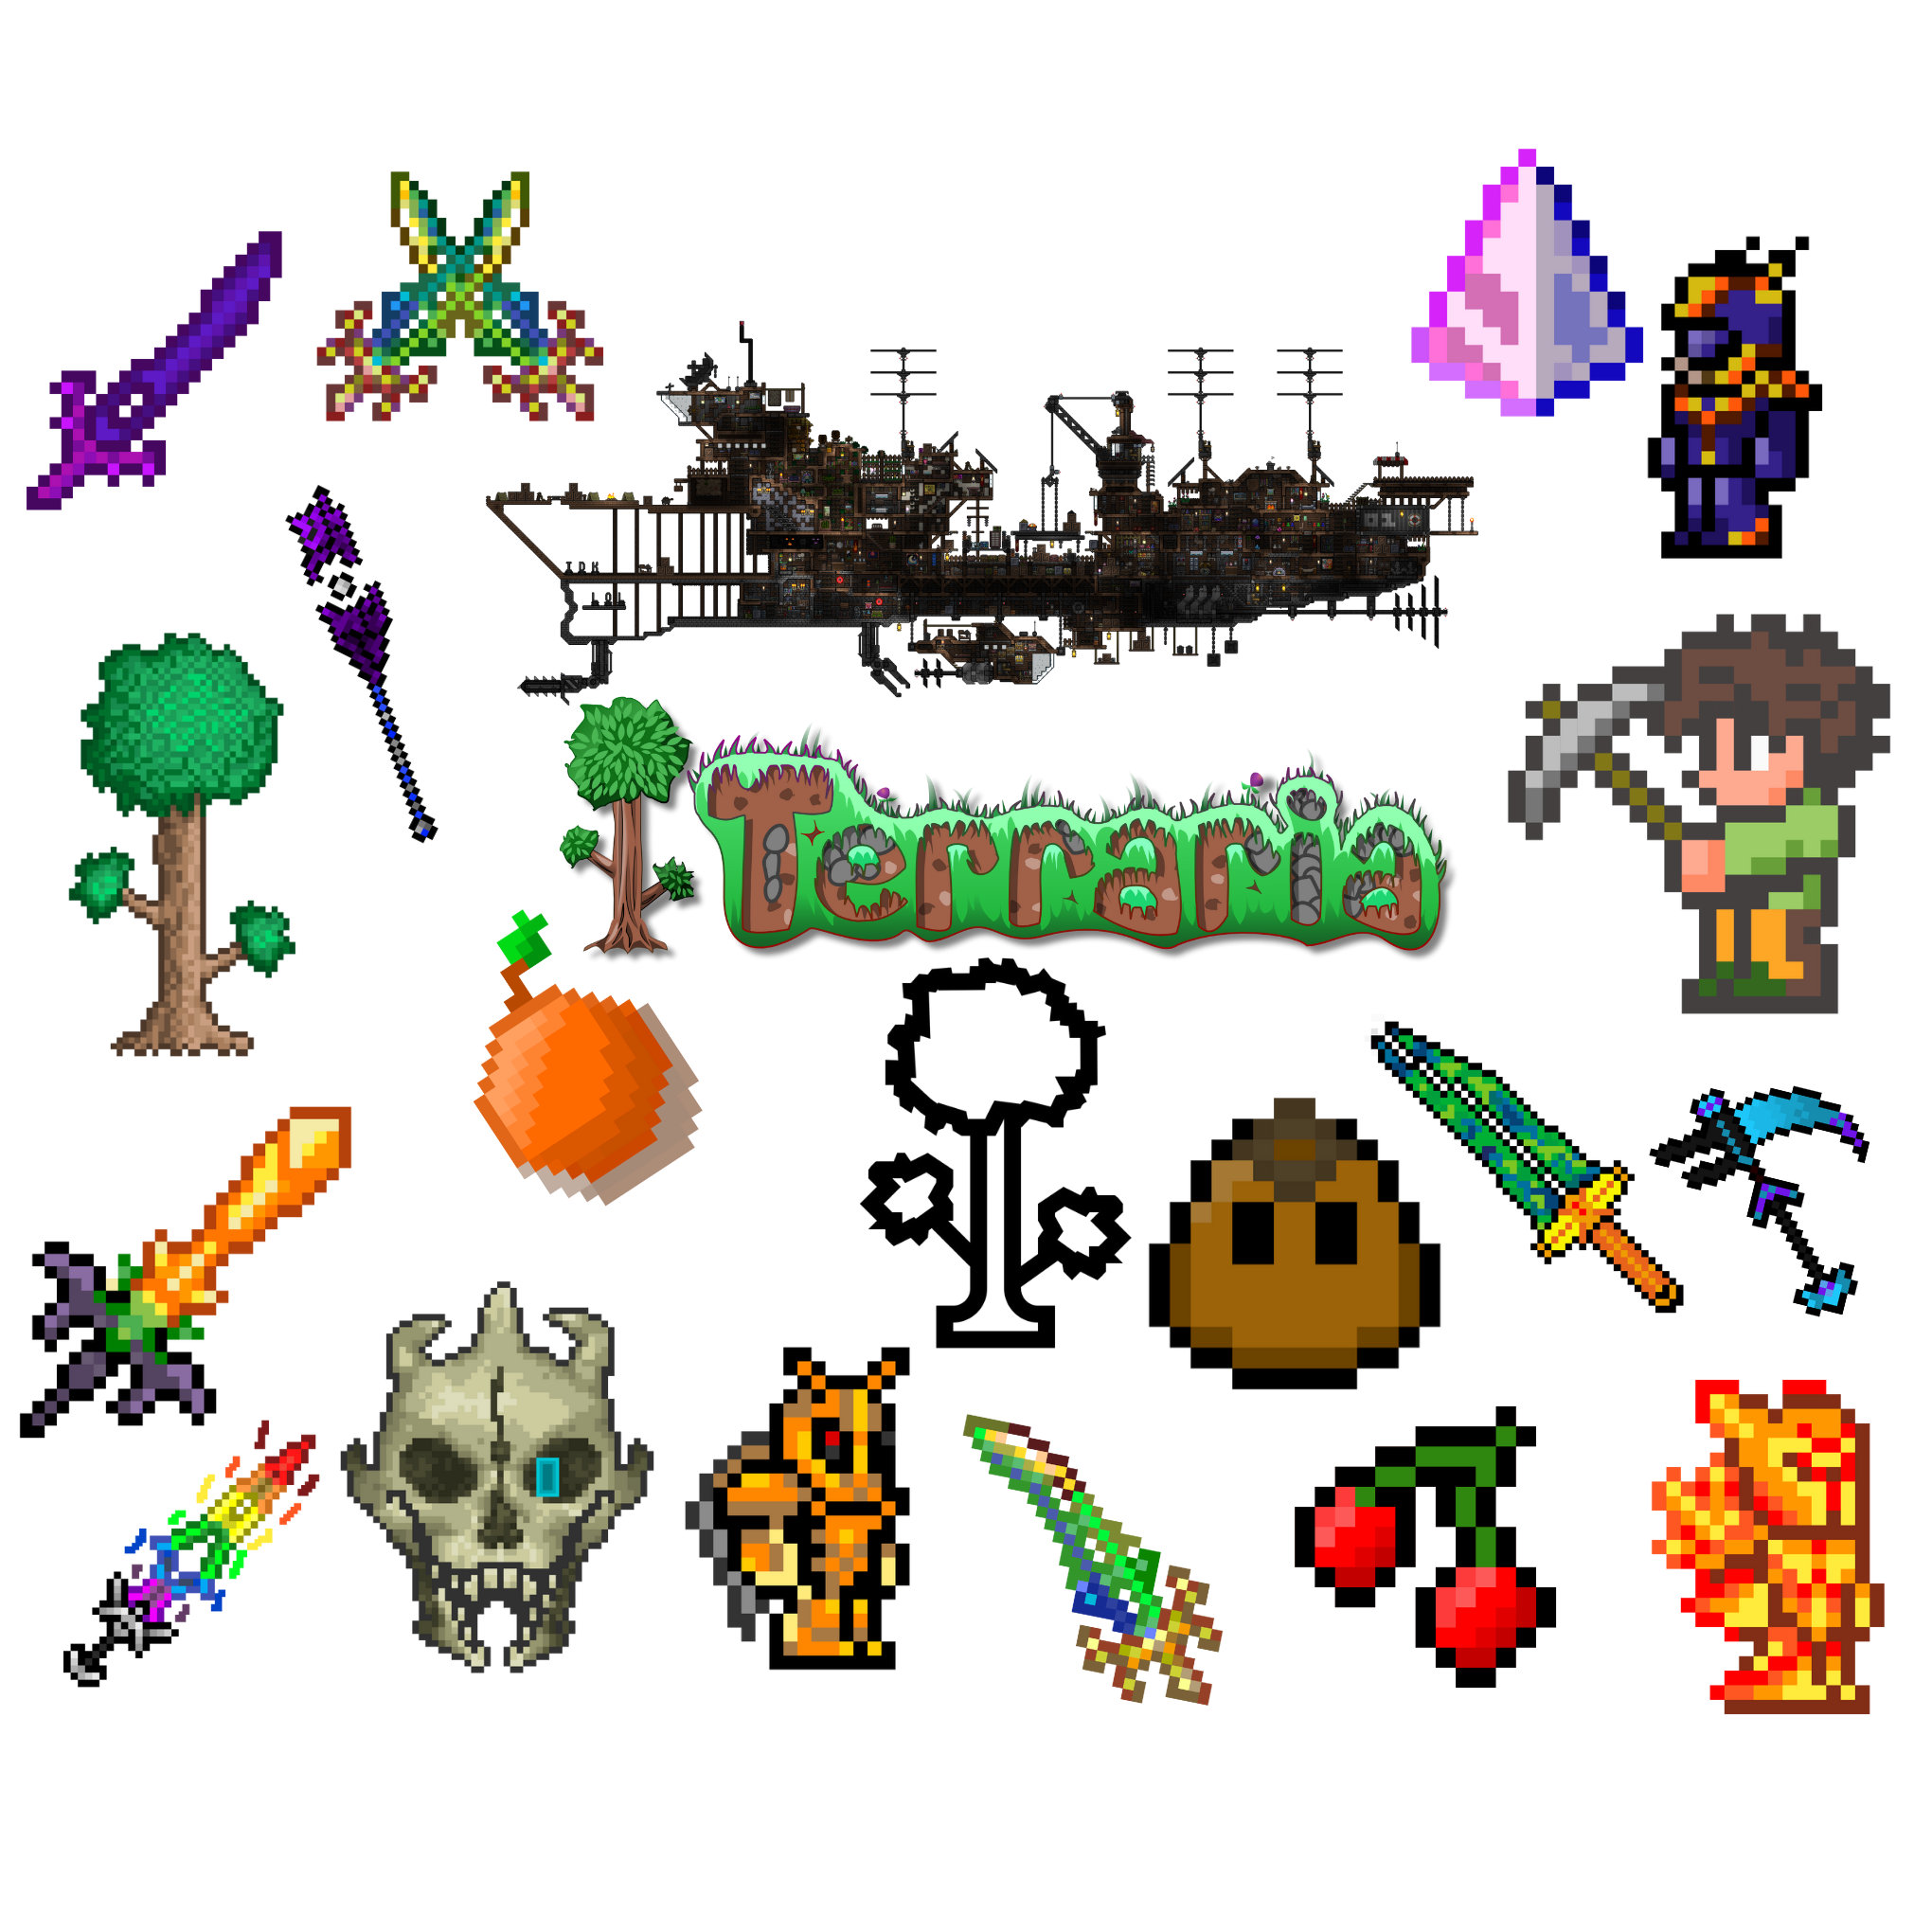 Terraria Vector Icons free download in SVG, PNG Format